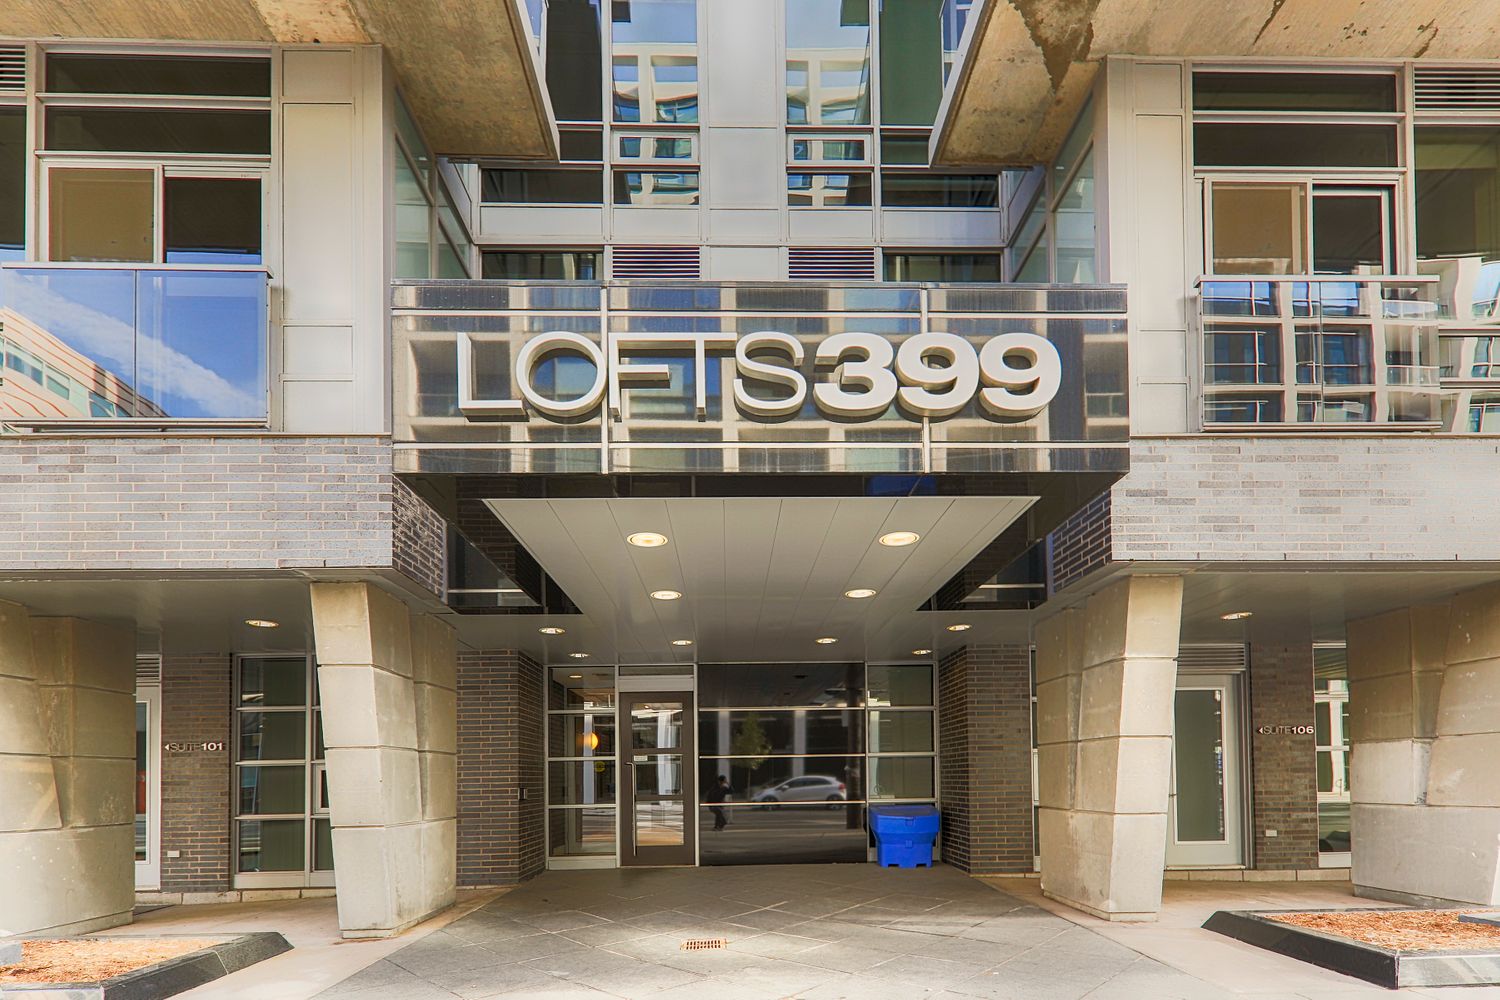 399 Adelaide Street W. Lofts 399 is located in  Downtown, Toronto - image #4 of 4